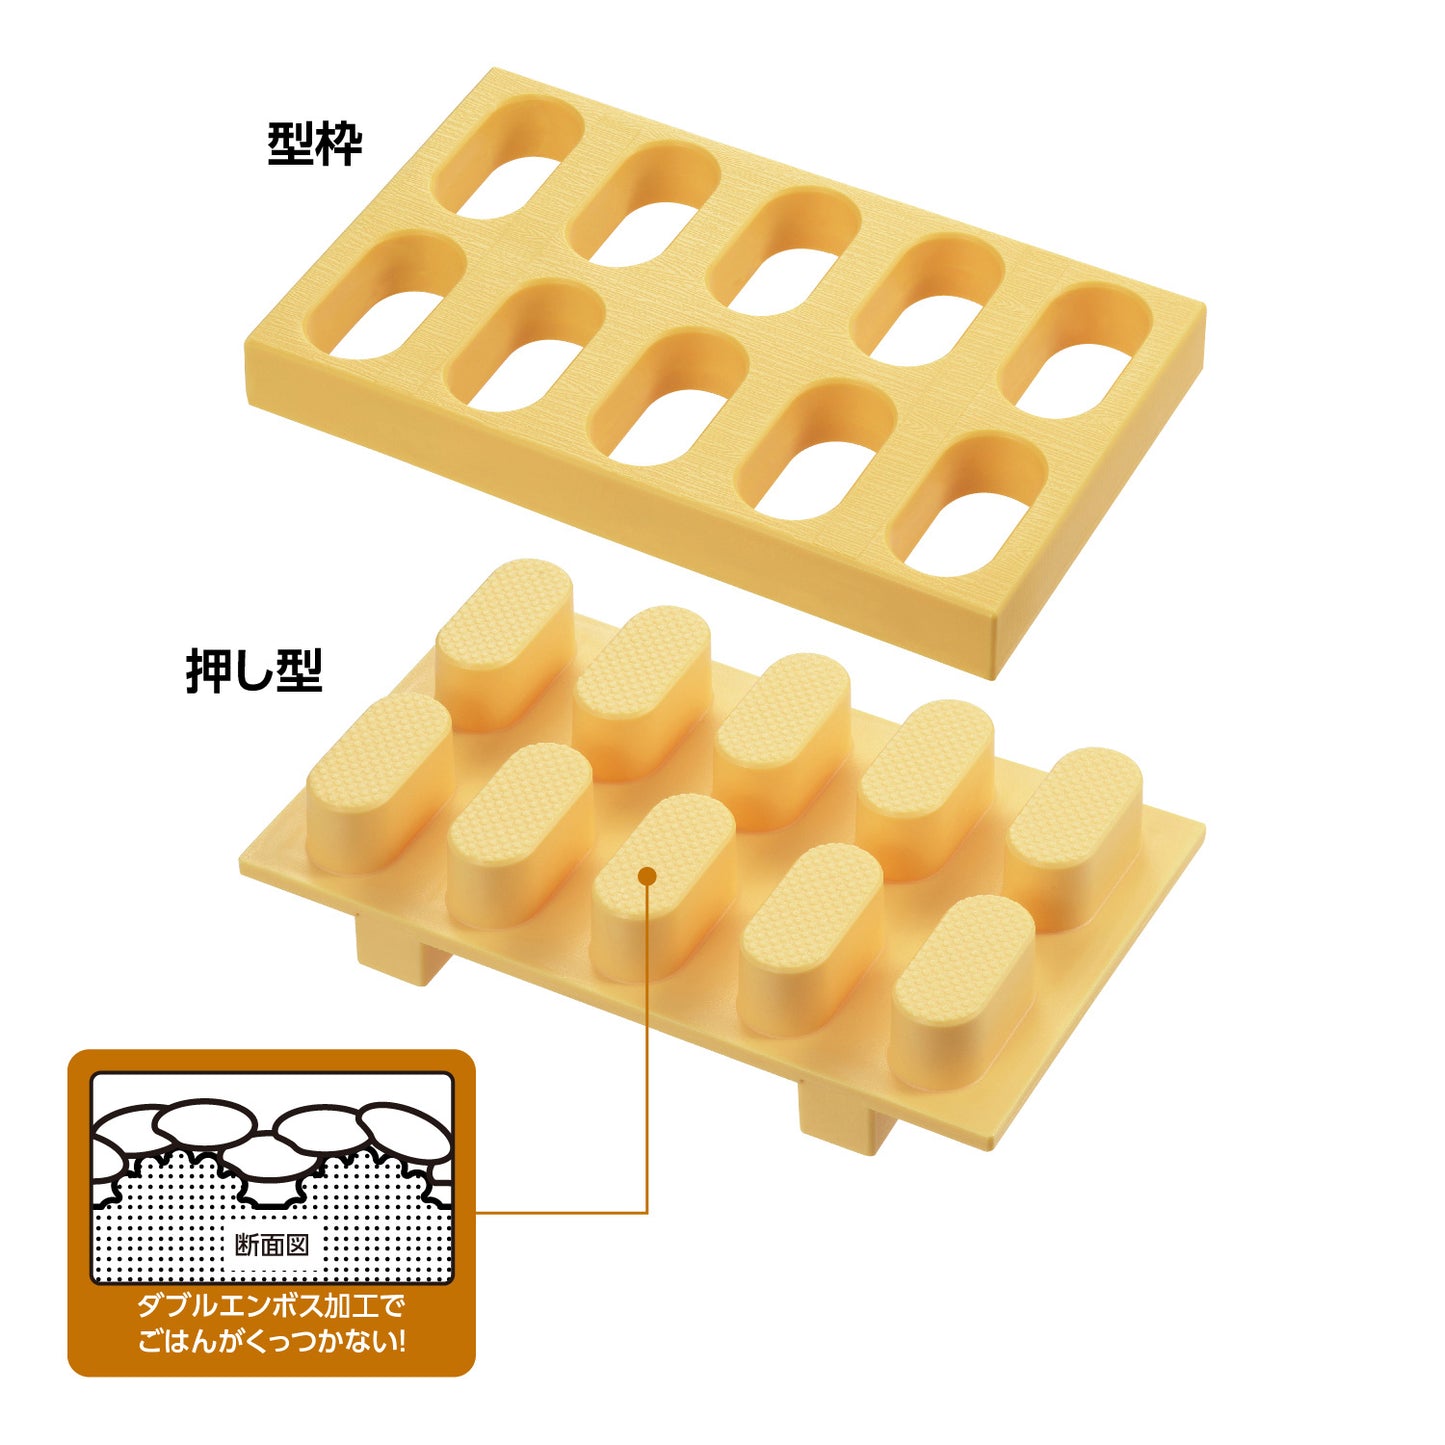 Jumping Sushi Mould